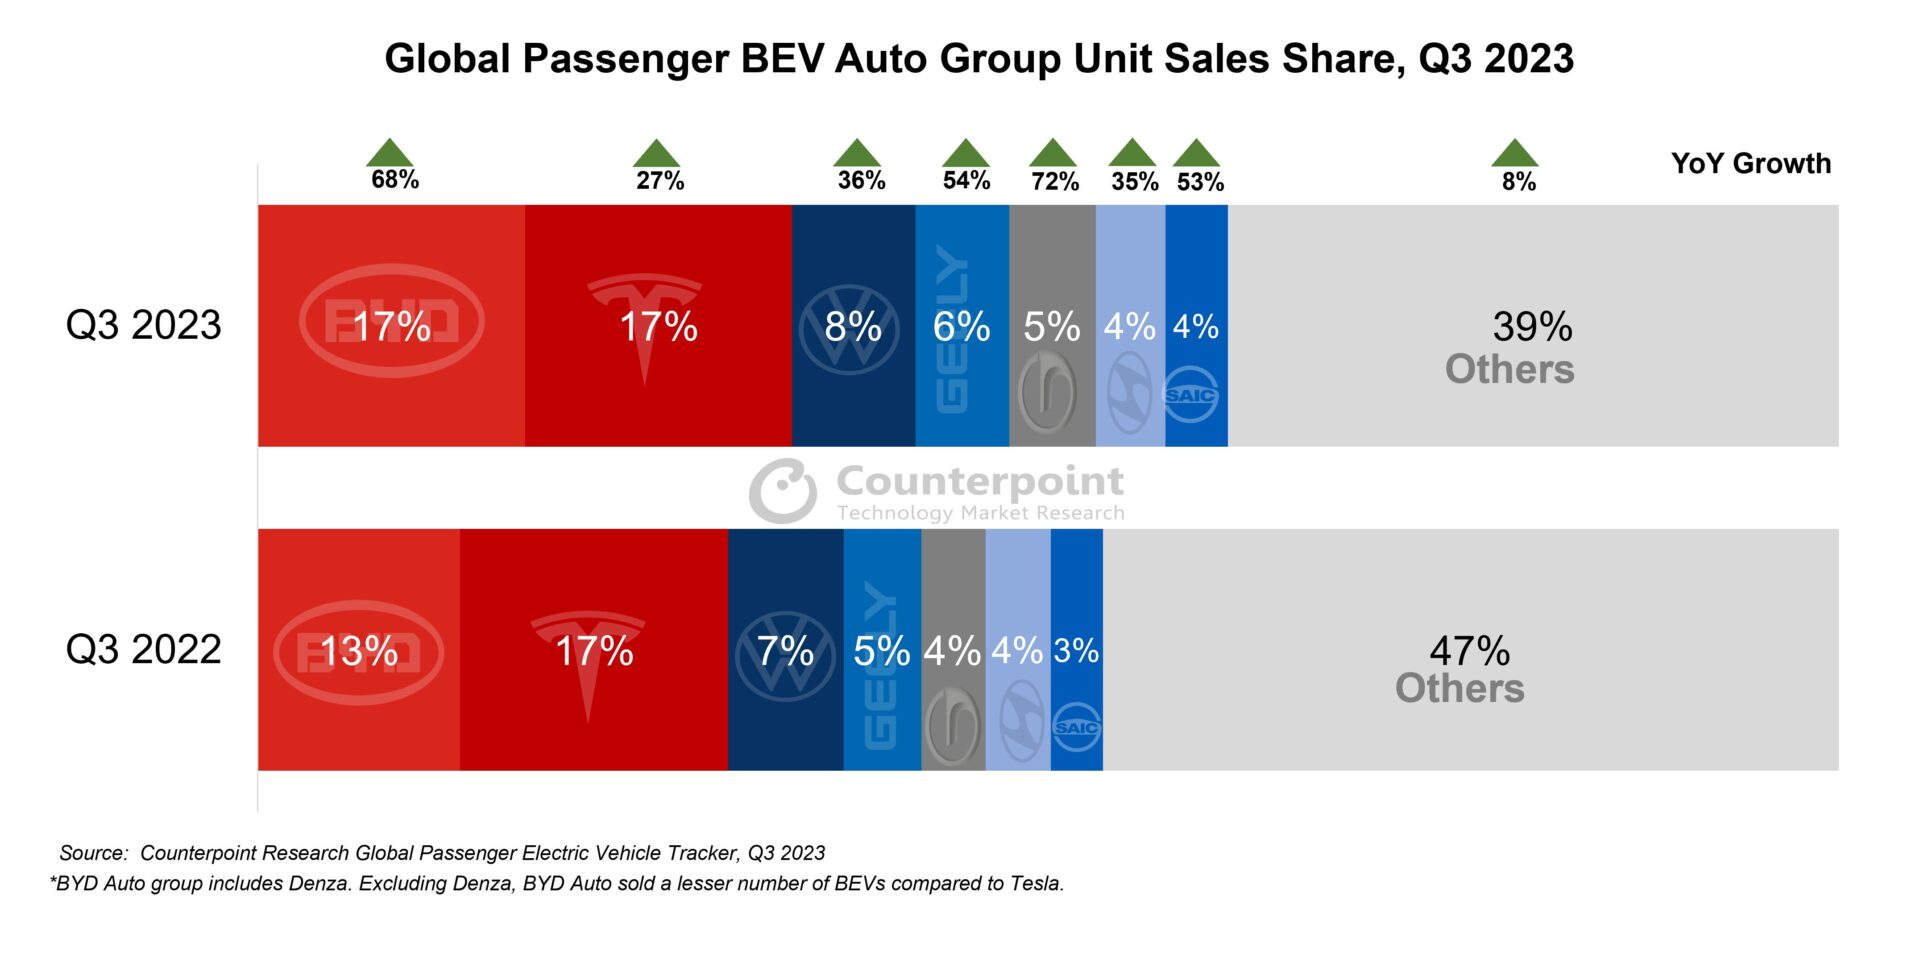 A chart showing Global Passenger BEV Auto Group Sales Share in Q3 2023